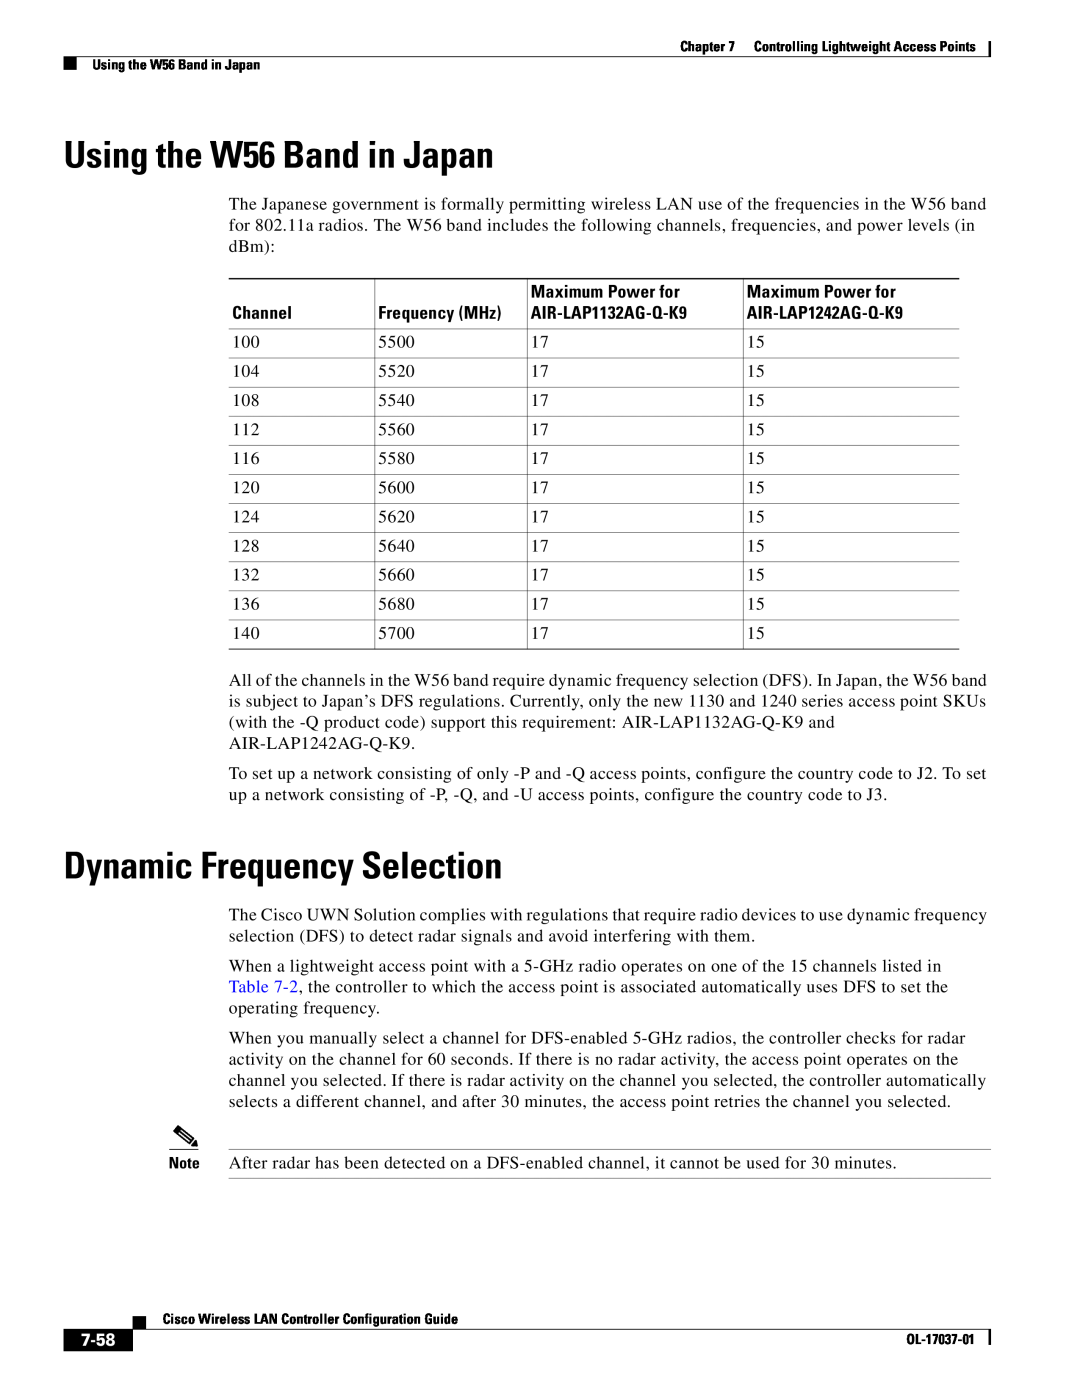 Cisco Systems OL-17037-01 manual Using the W56 Band in Japan, Dynamic Frequency Selection, Maximum Power for, Channel, 7-58 